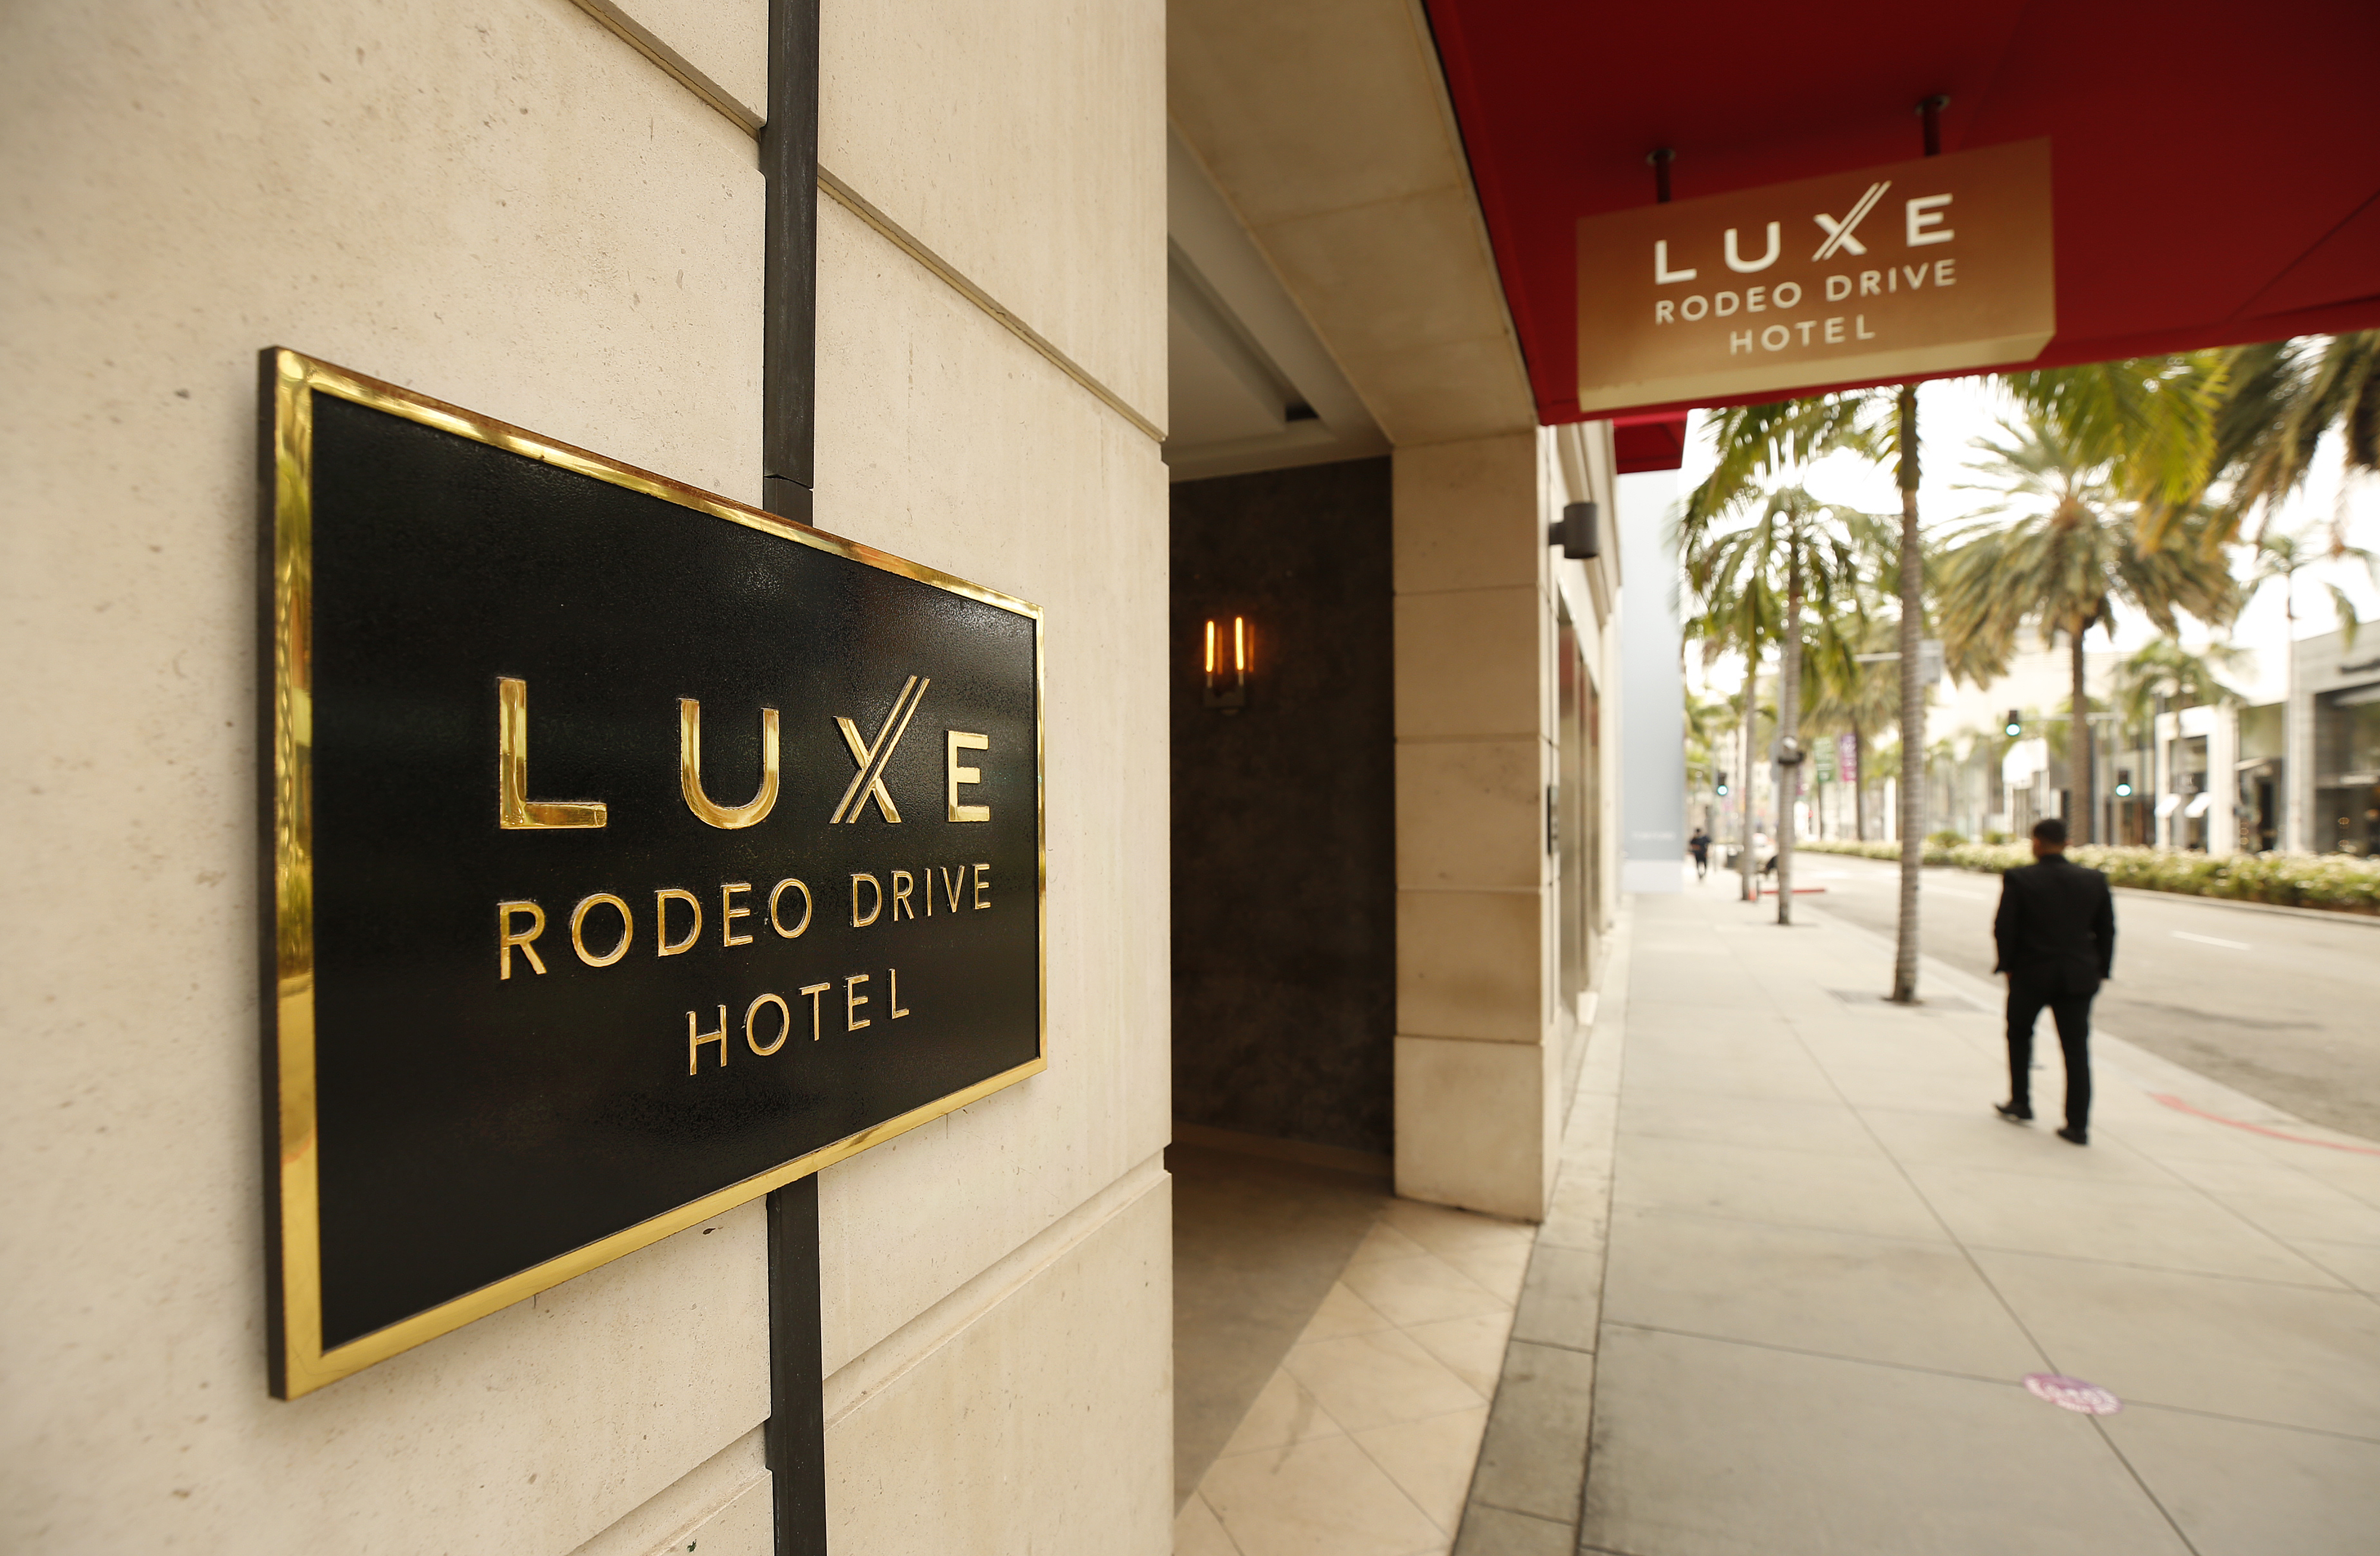 The Luxe Rodeo Drive Hotel located at 360 North Rodeo Drive in Beverly Hills has closed as a casualty of a COVID pandemic that is likely to put more hotels out of business.